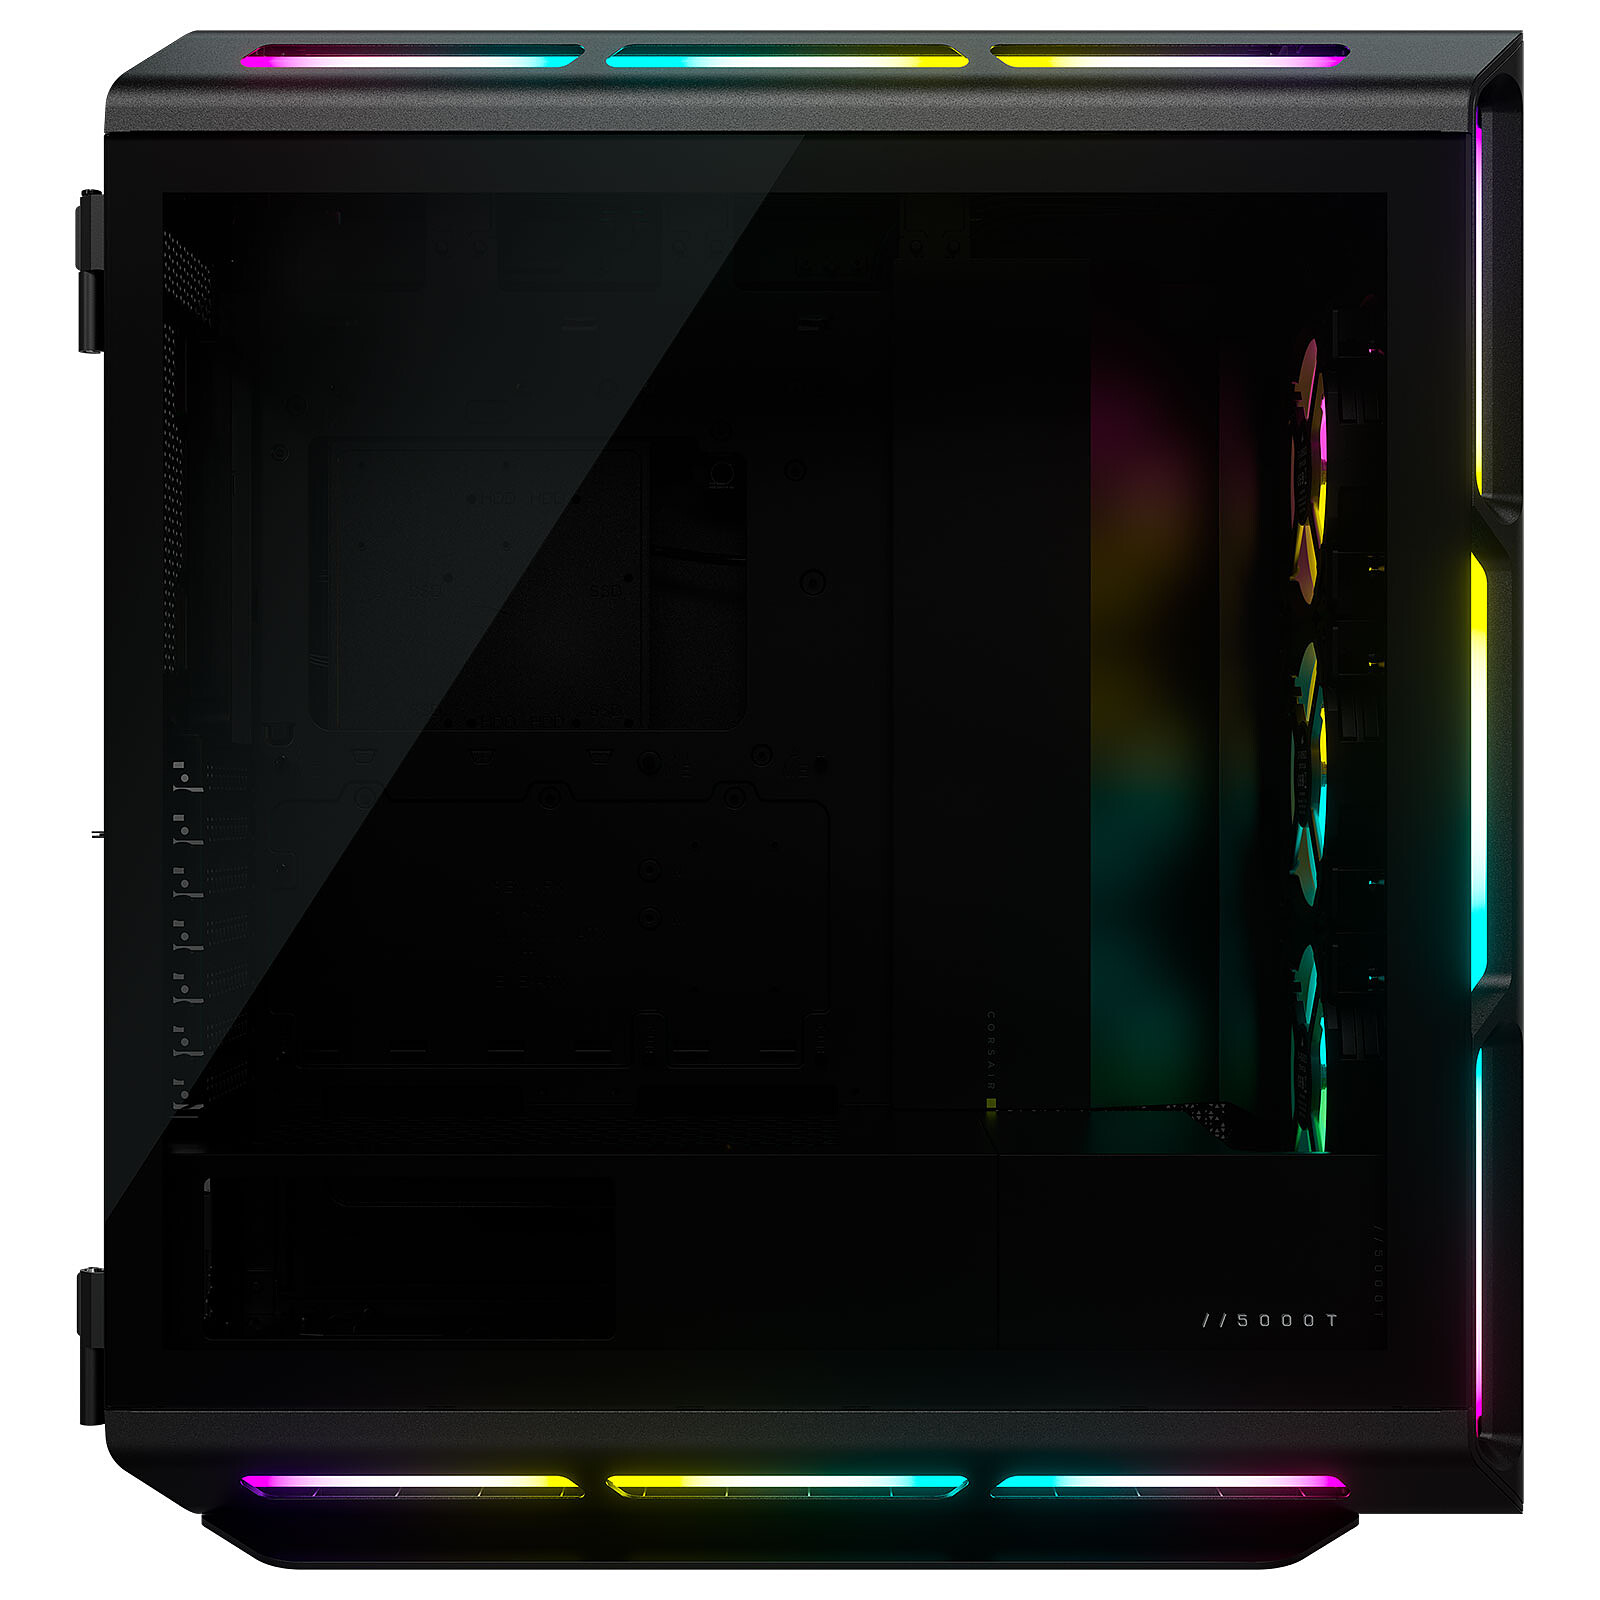 CORSAIR 5000T RGB case has over 200 individual RGB LEDs - 9to5Toys